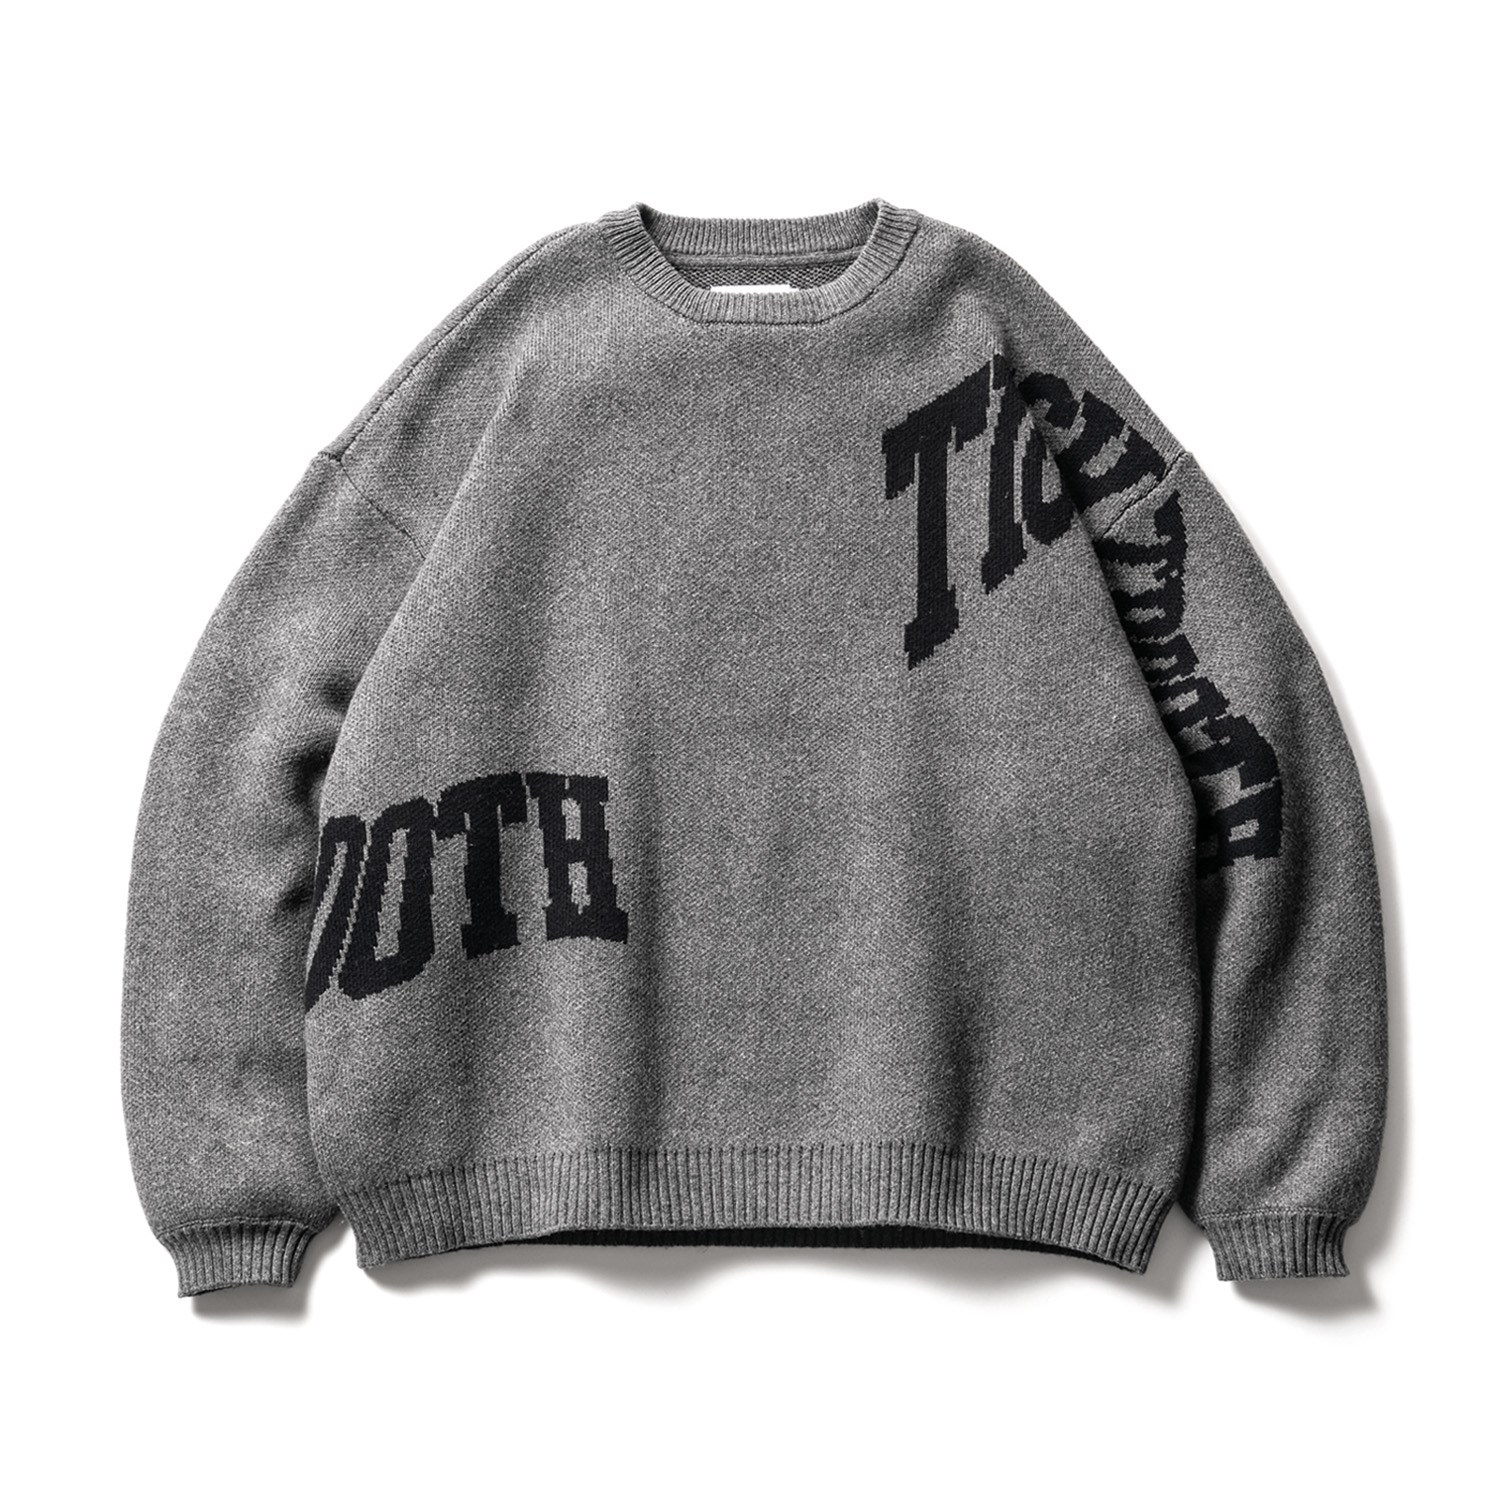 TIGHTBOOTH/ACID LOGO KNIT SWEATER（Charcoal）［ニットセーター-22 